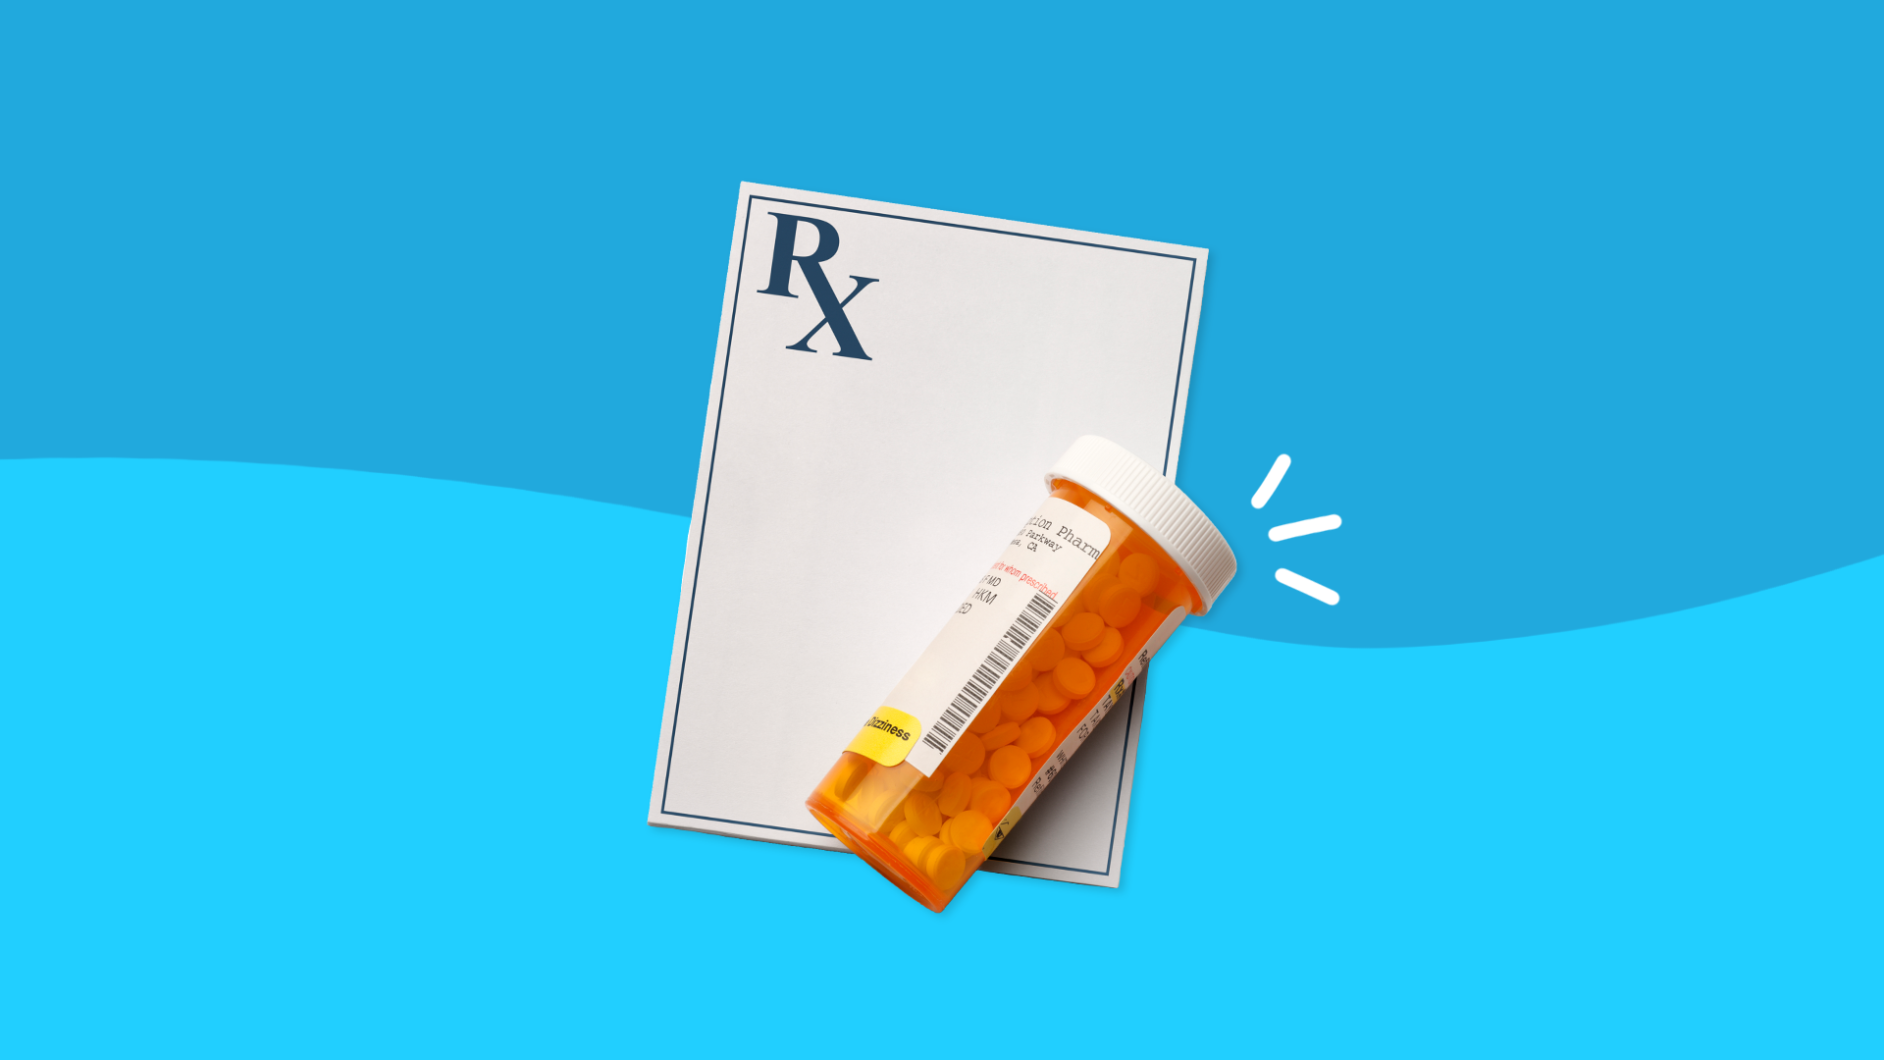 Rx pad and pill bottle: Finasteride Side Effects